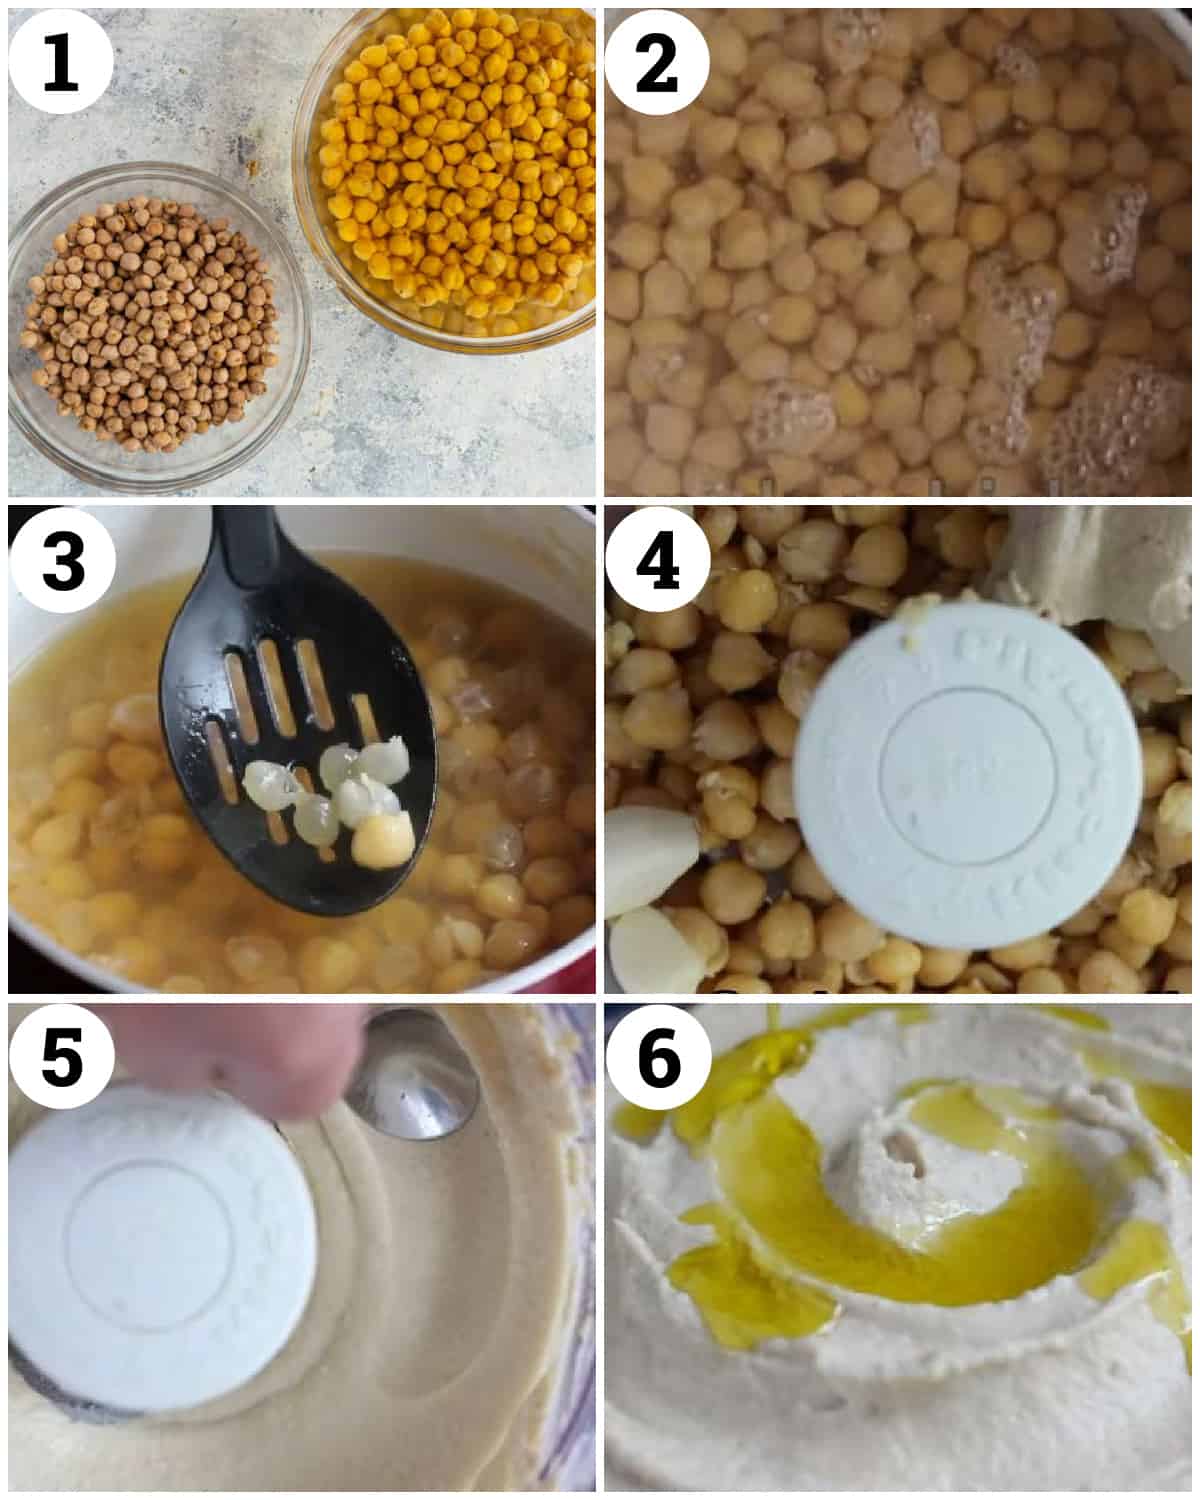 soak the chickpeas, boil them until tender. Blend with tahini and garlic and water. Drizzle with olive oil. 